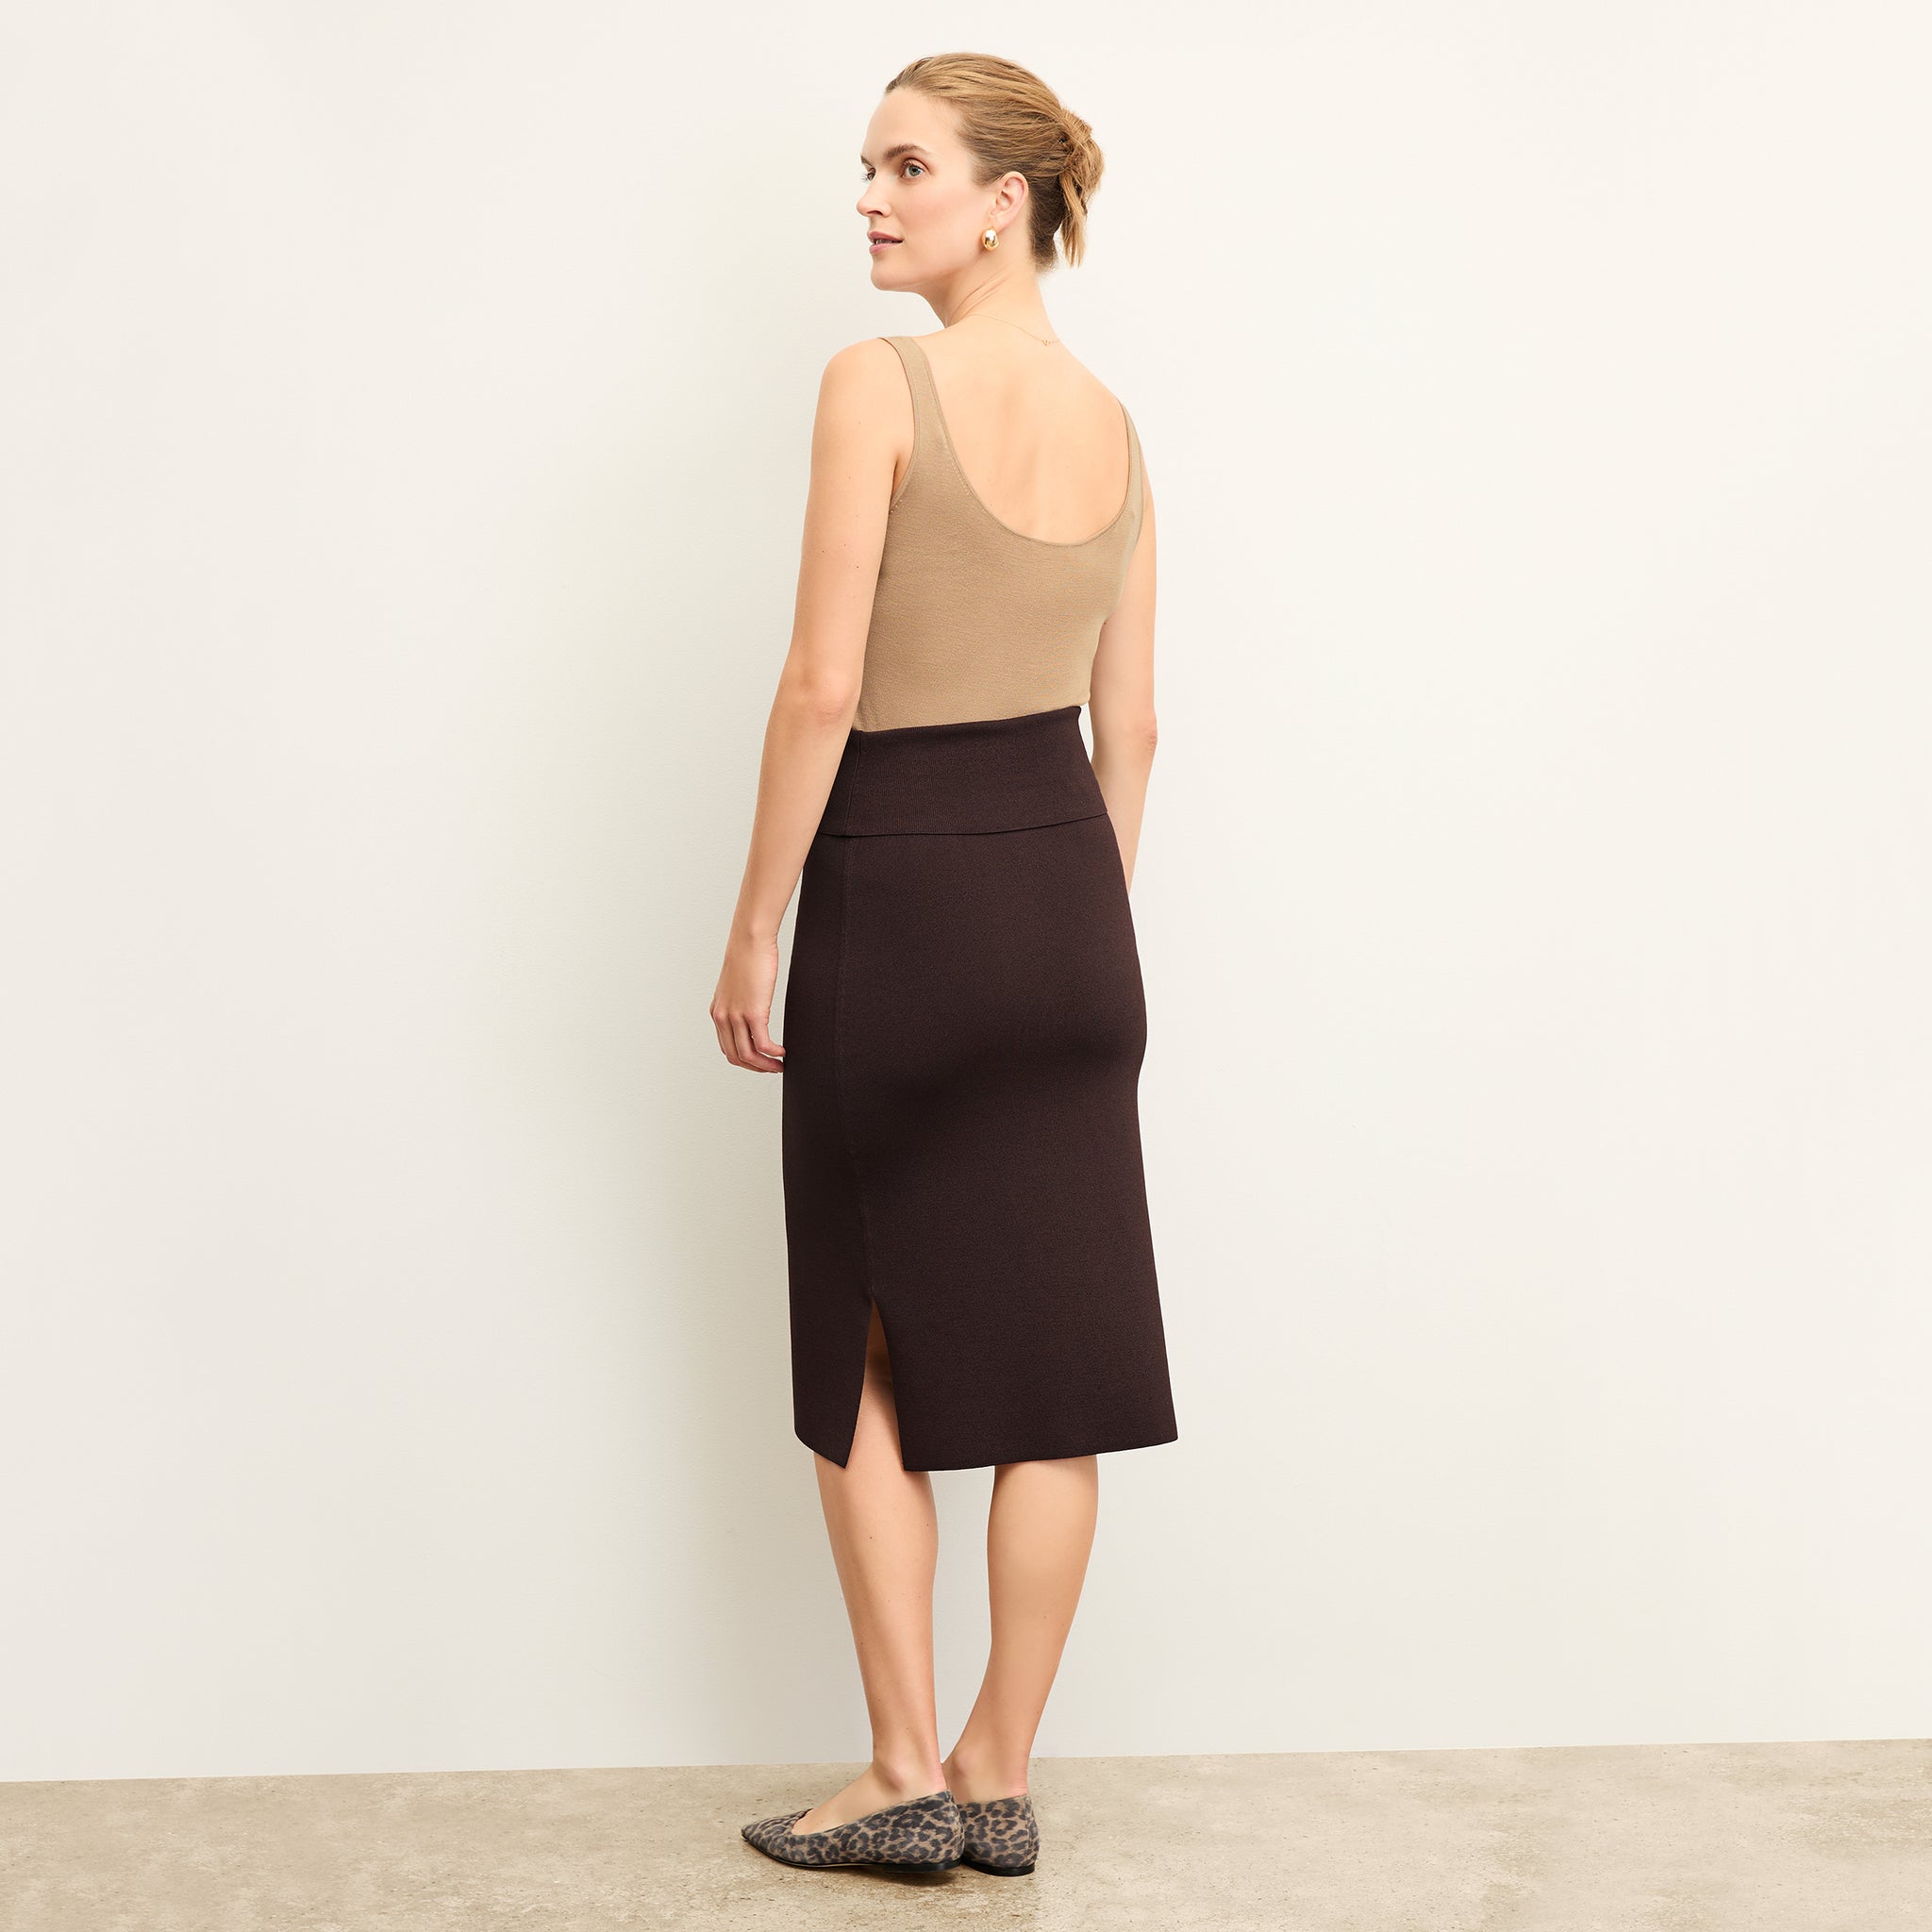 back image of a woman wearing the Harlem Skirt in Chocolate